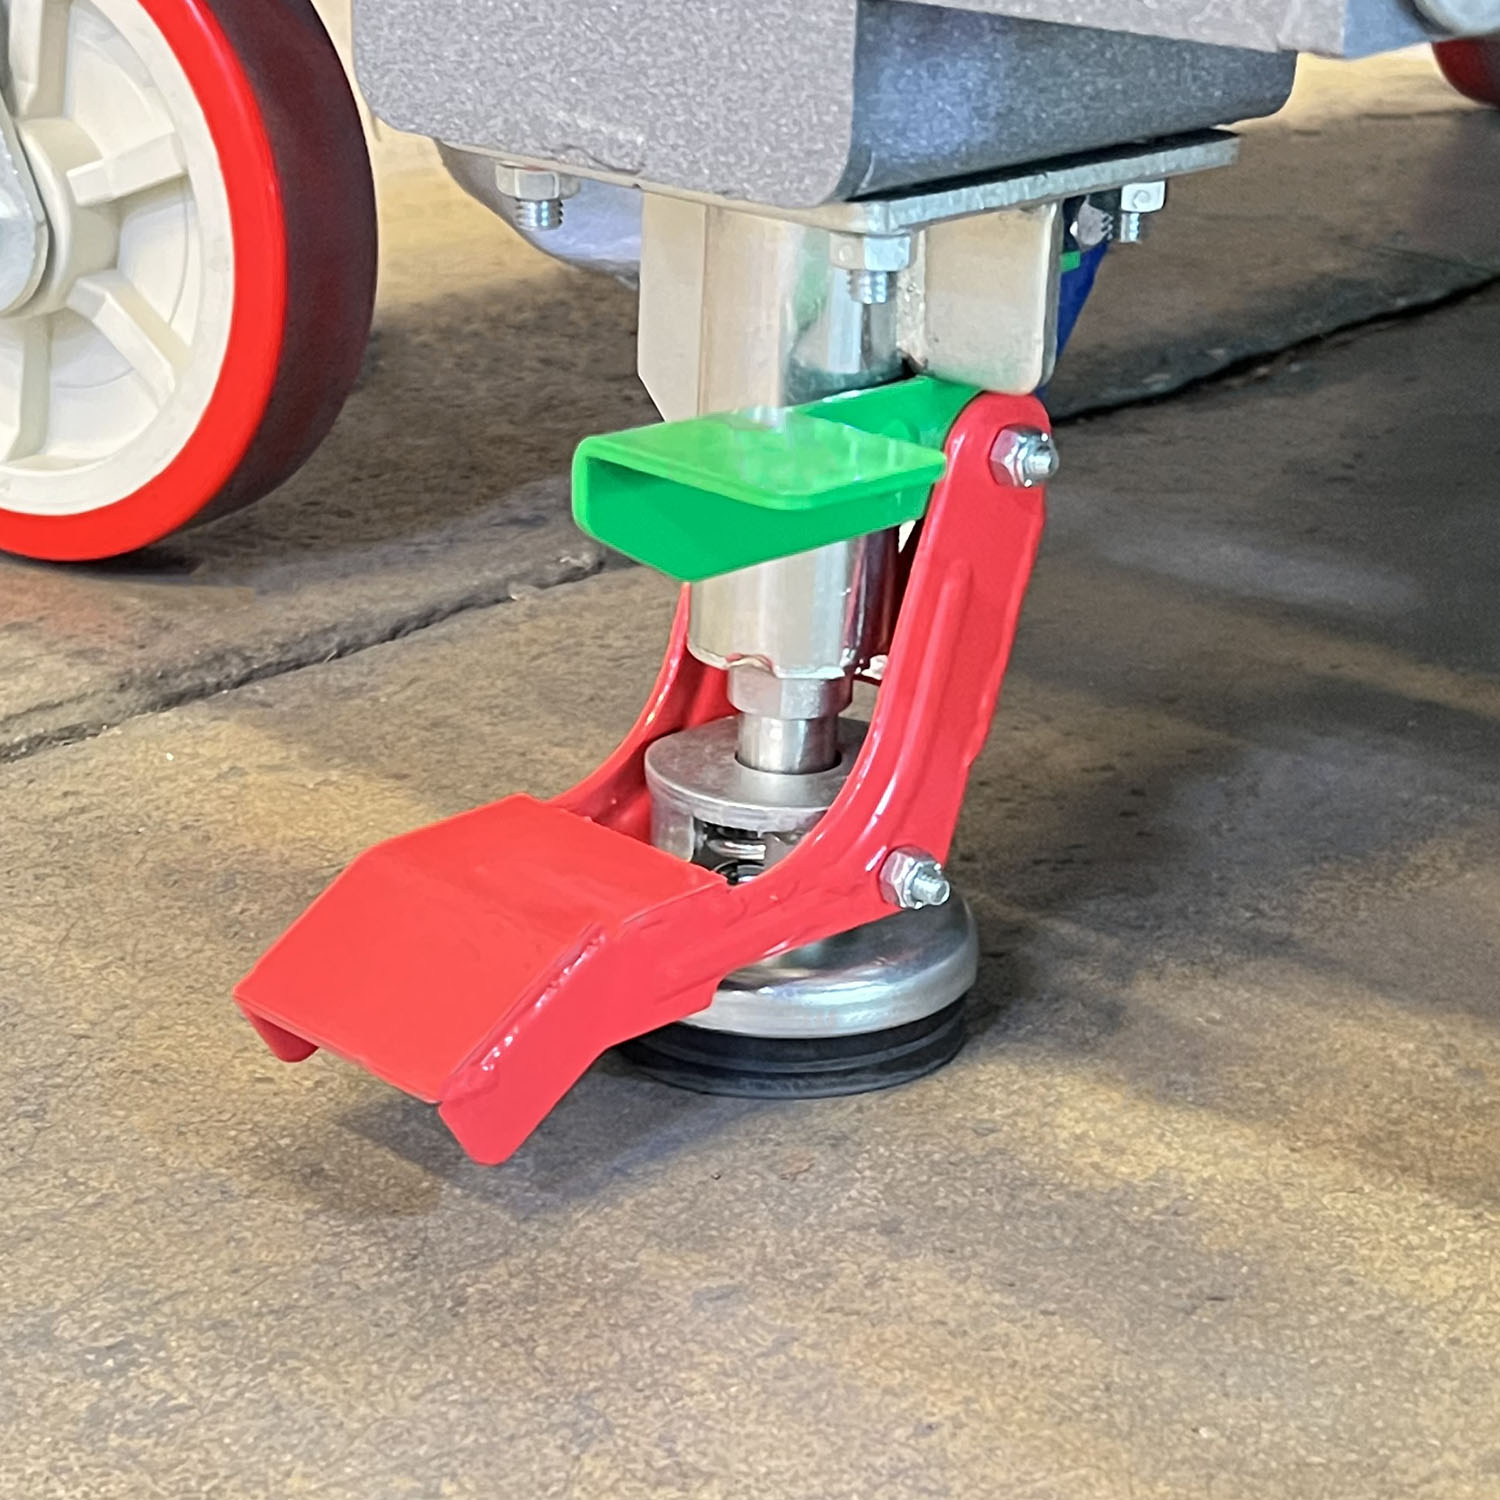 heavy-duty foot-activated brakes are used. Cage Cart Material handling INDUSTRIAL CARTS, picking cart, forklift compatible cart Forklift Cart picking cart | National Cart picking Utility Cart, Distribution Cart, picking cart, ecom cart, ecommerce cart, ecommerce picking cart, picking cart, grocery cart, grocery picking cart, department store cart, beverage cart BACK STOCK CARTS Picking Cart Rolltainer picking cart